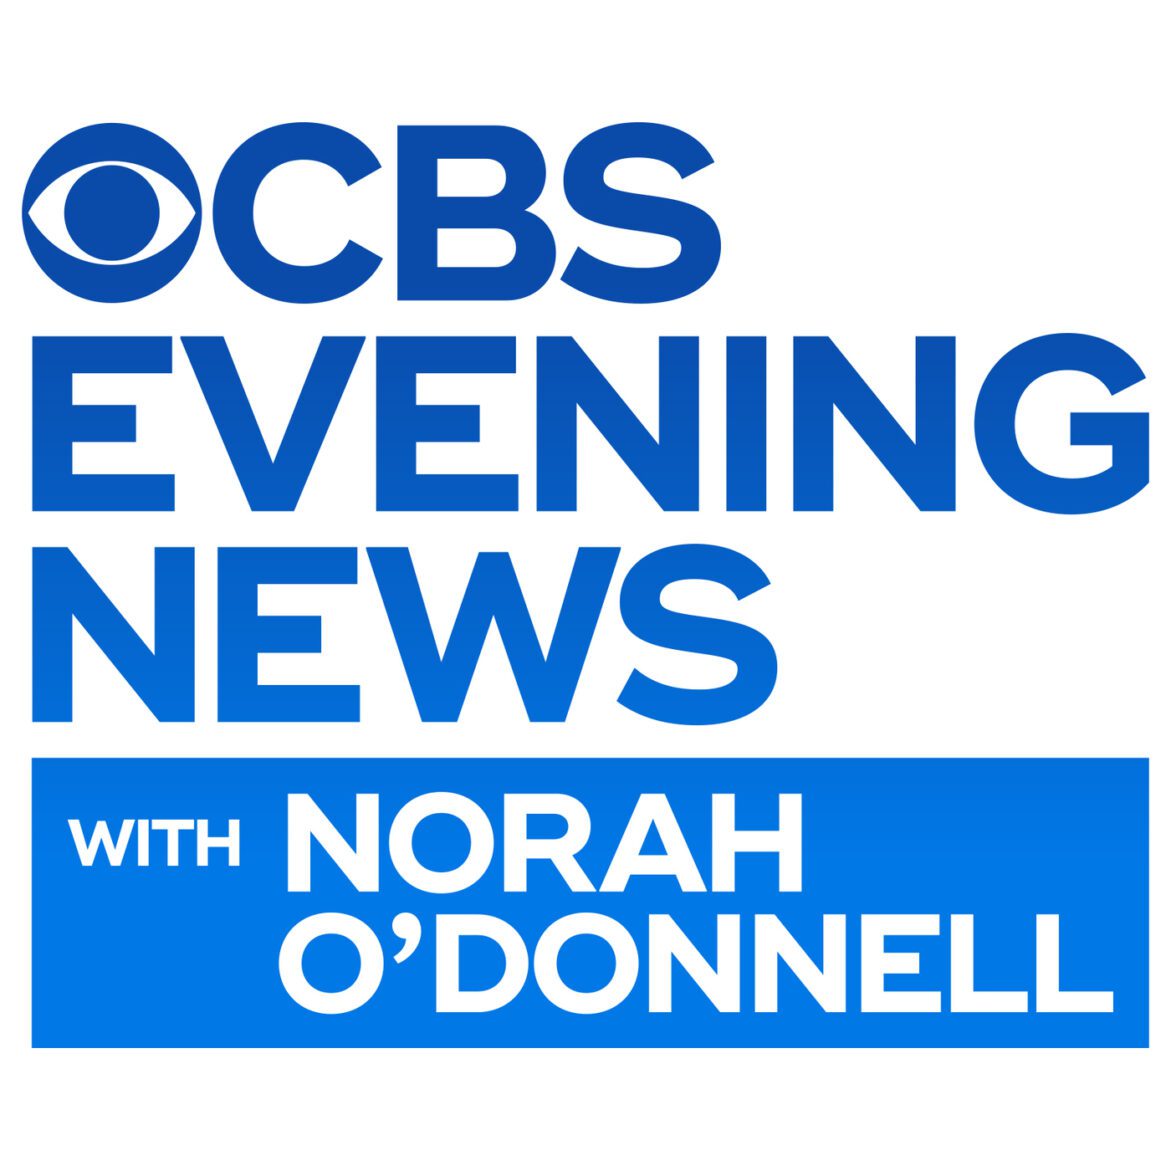 Black Podcasting - CBS Evening News with Norah O'Donnell, 09/22